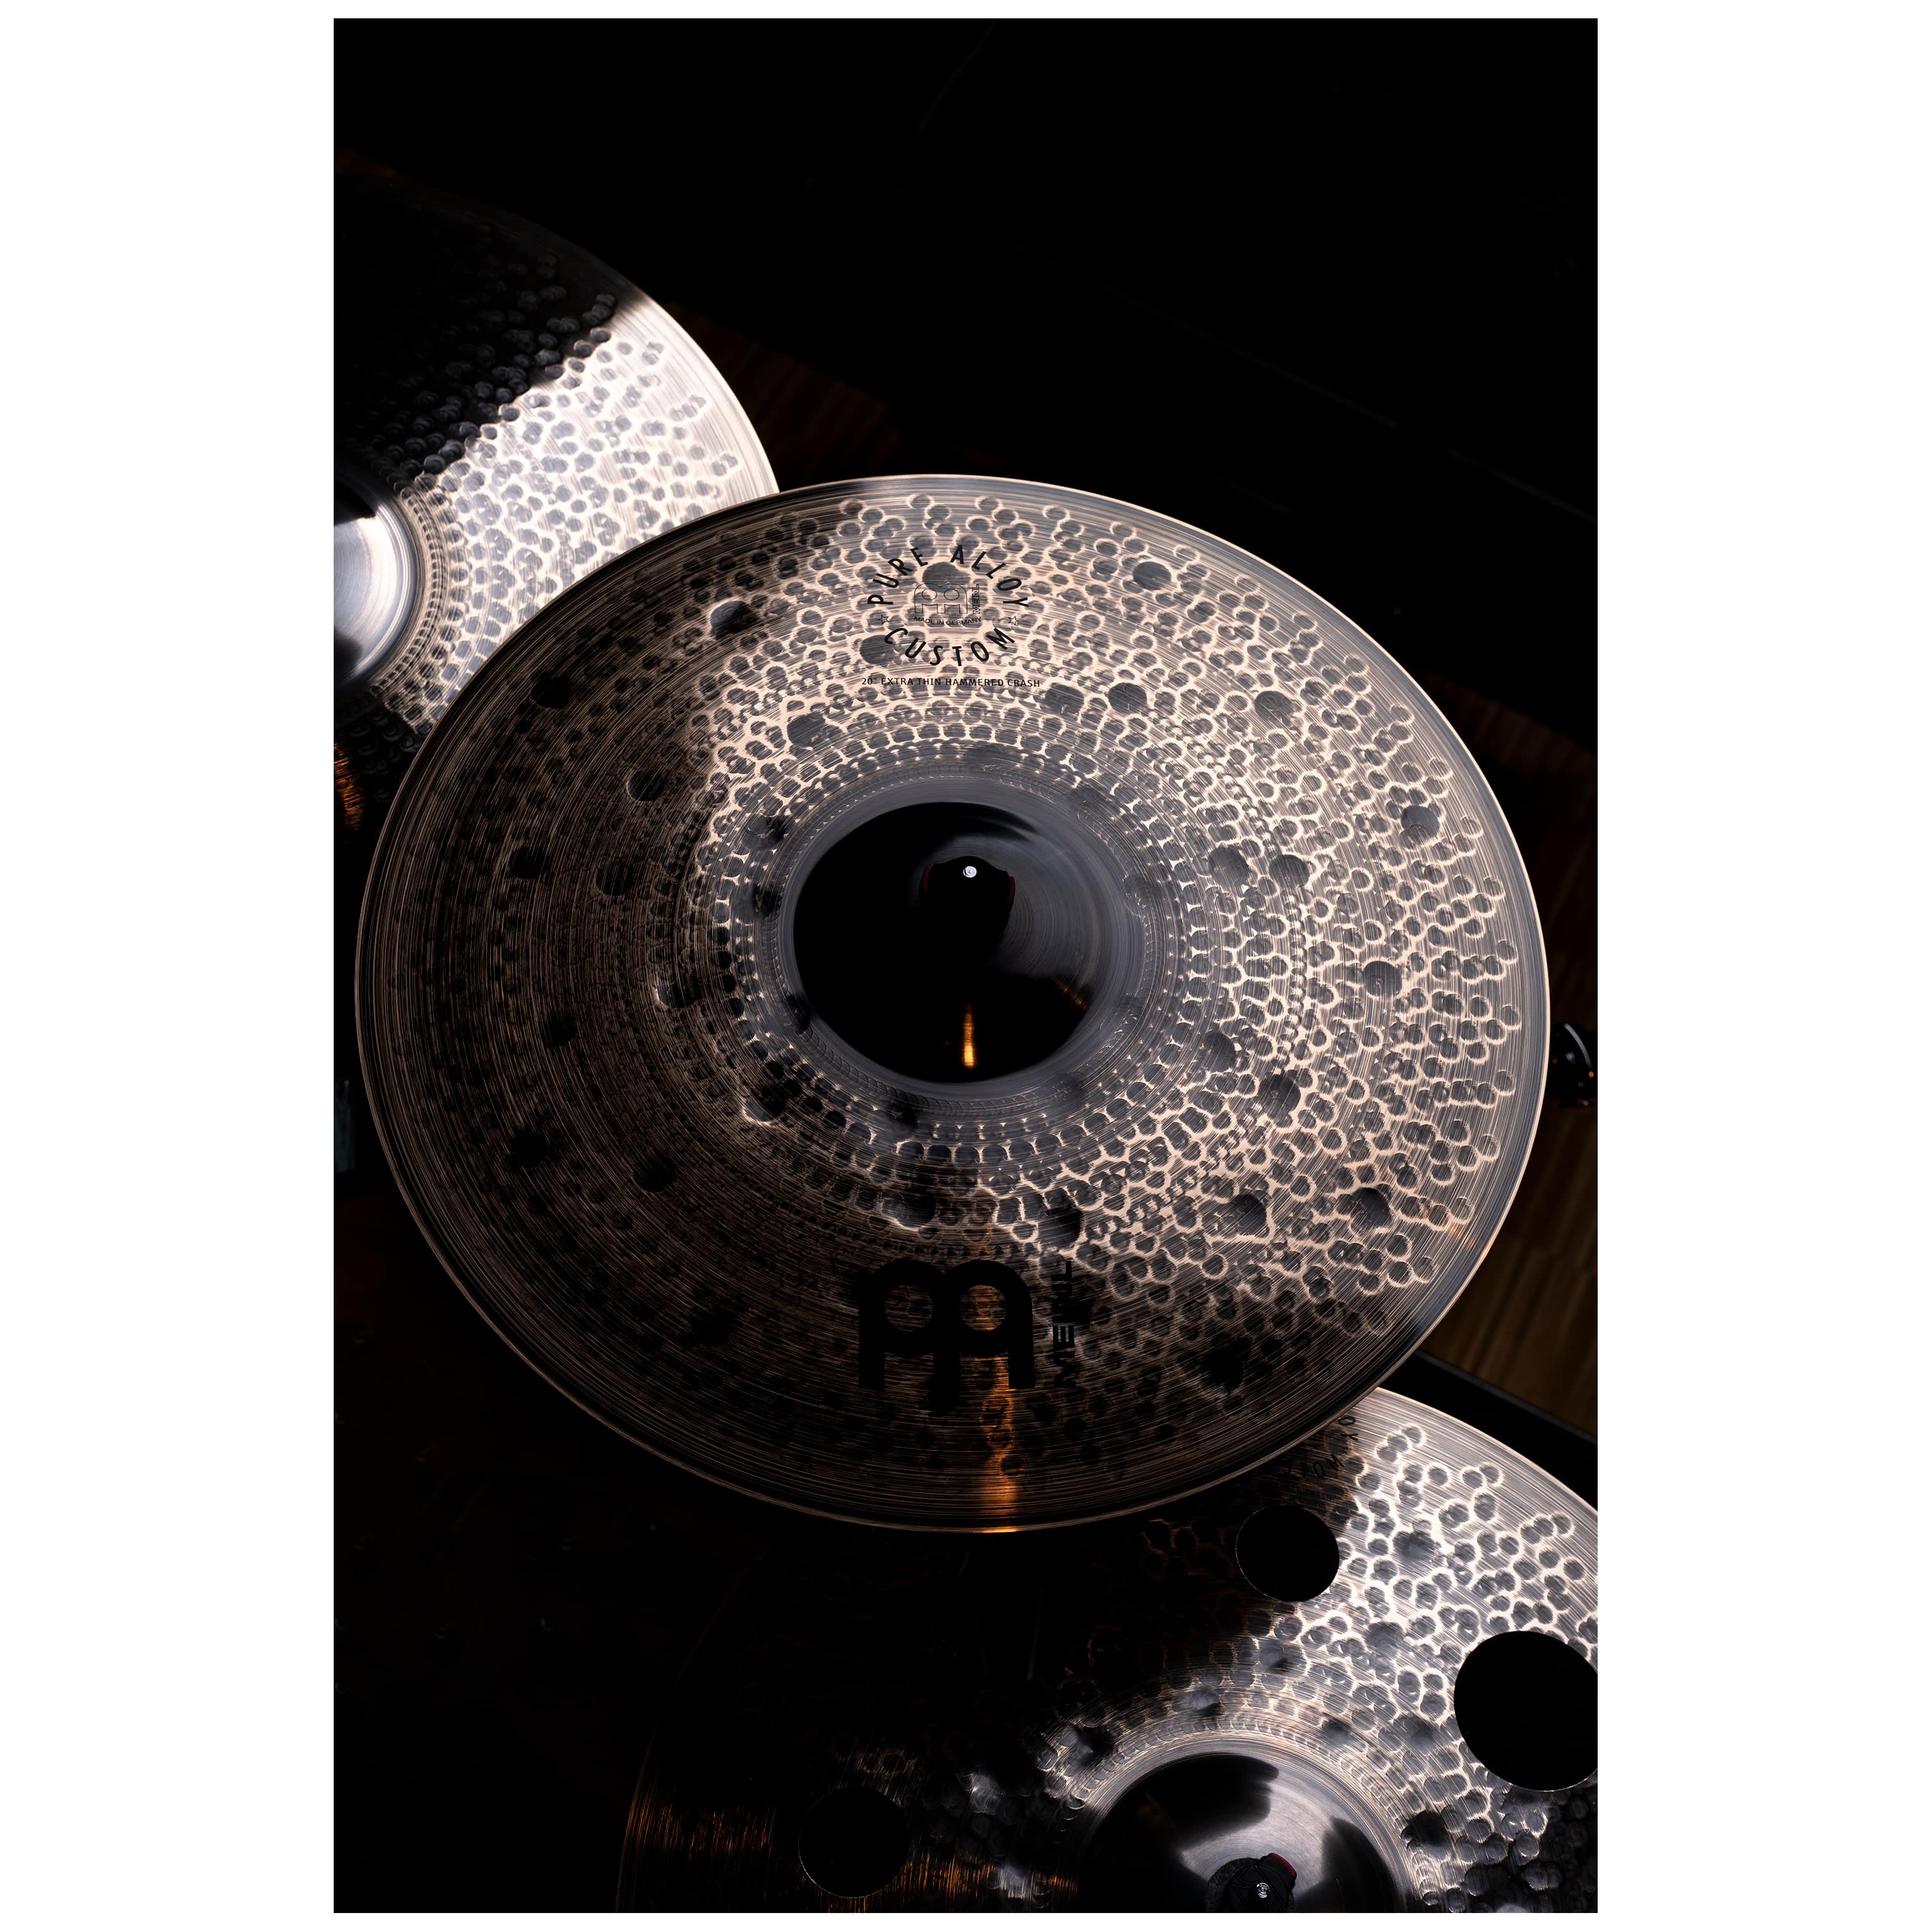 Meinl Cymbals PAC20ETHC - 20" Pure Alloy Custom Extra Thin Hammered Crash 6